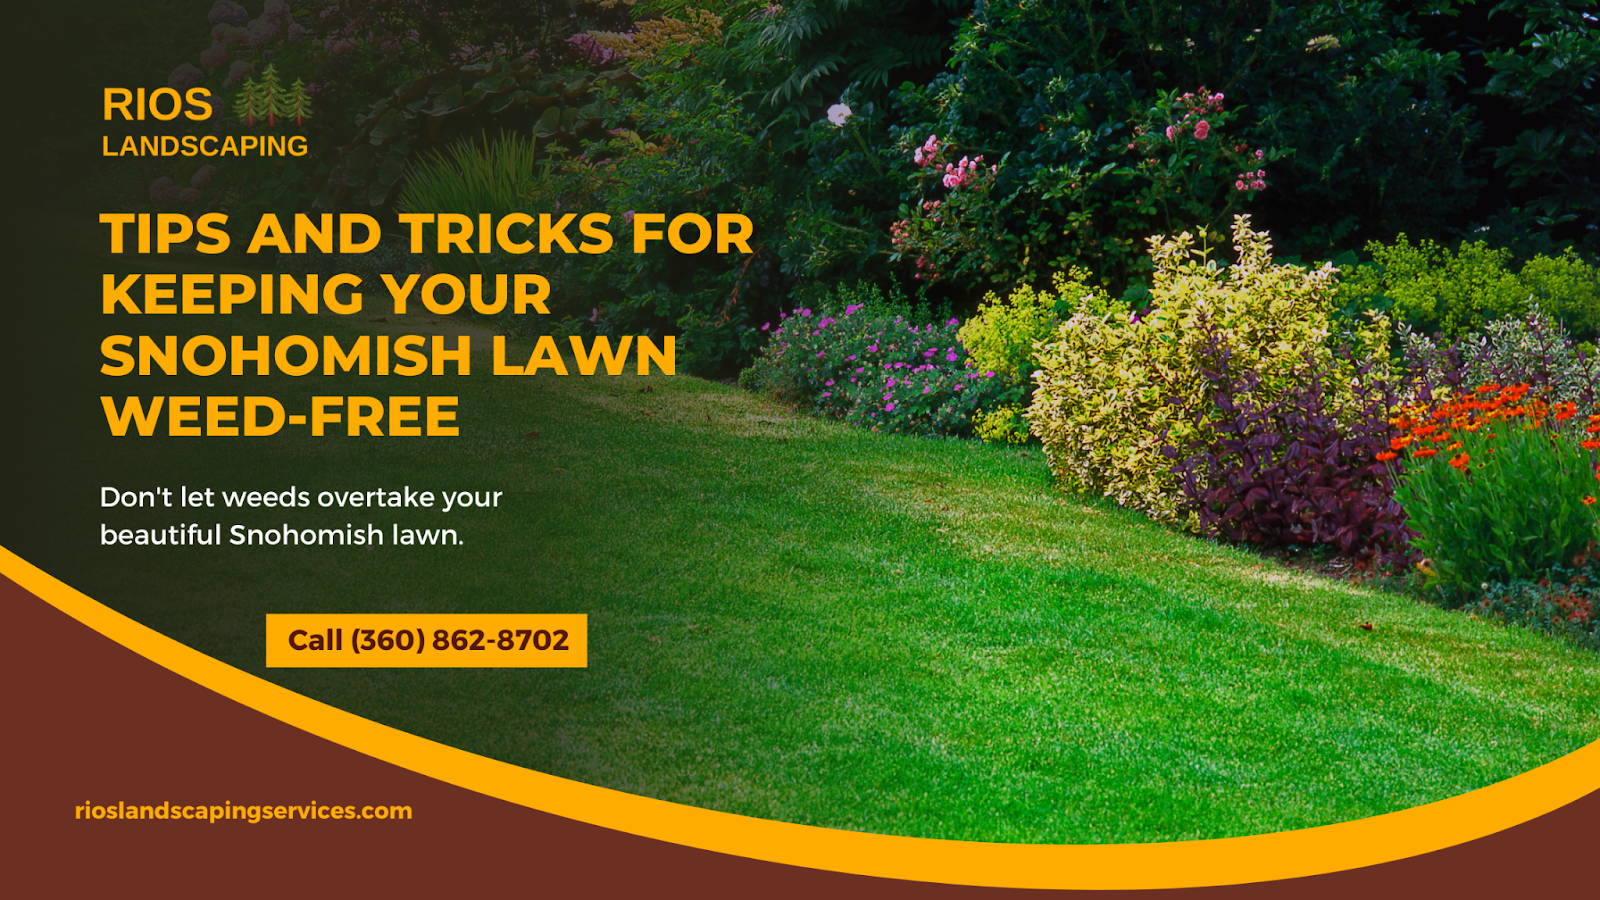 Tips and Tricks for Keeping Your Snohomish Lawn Weed-Free